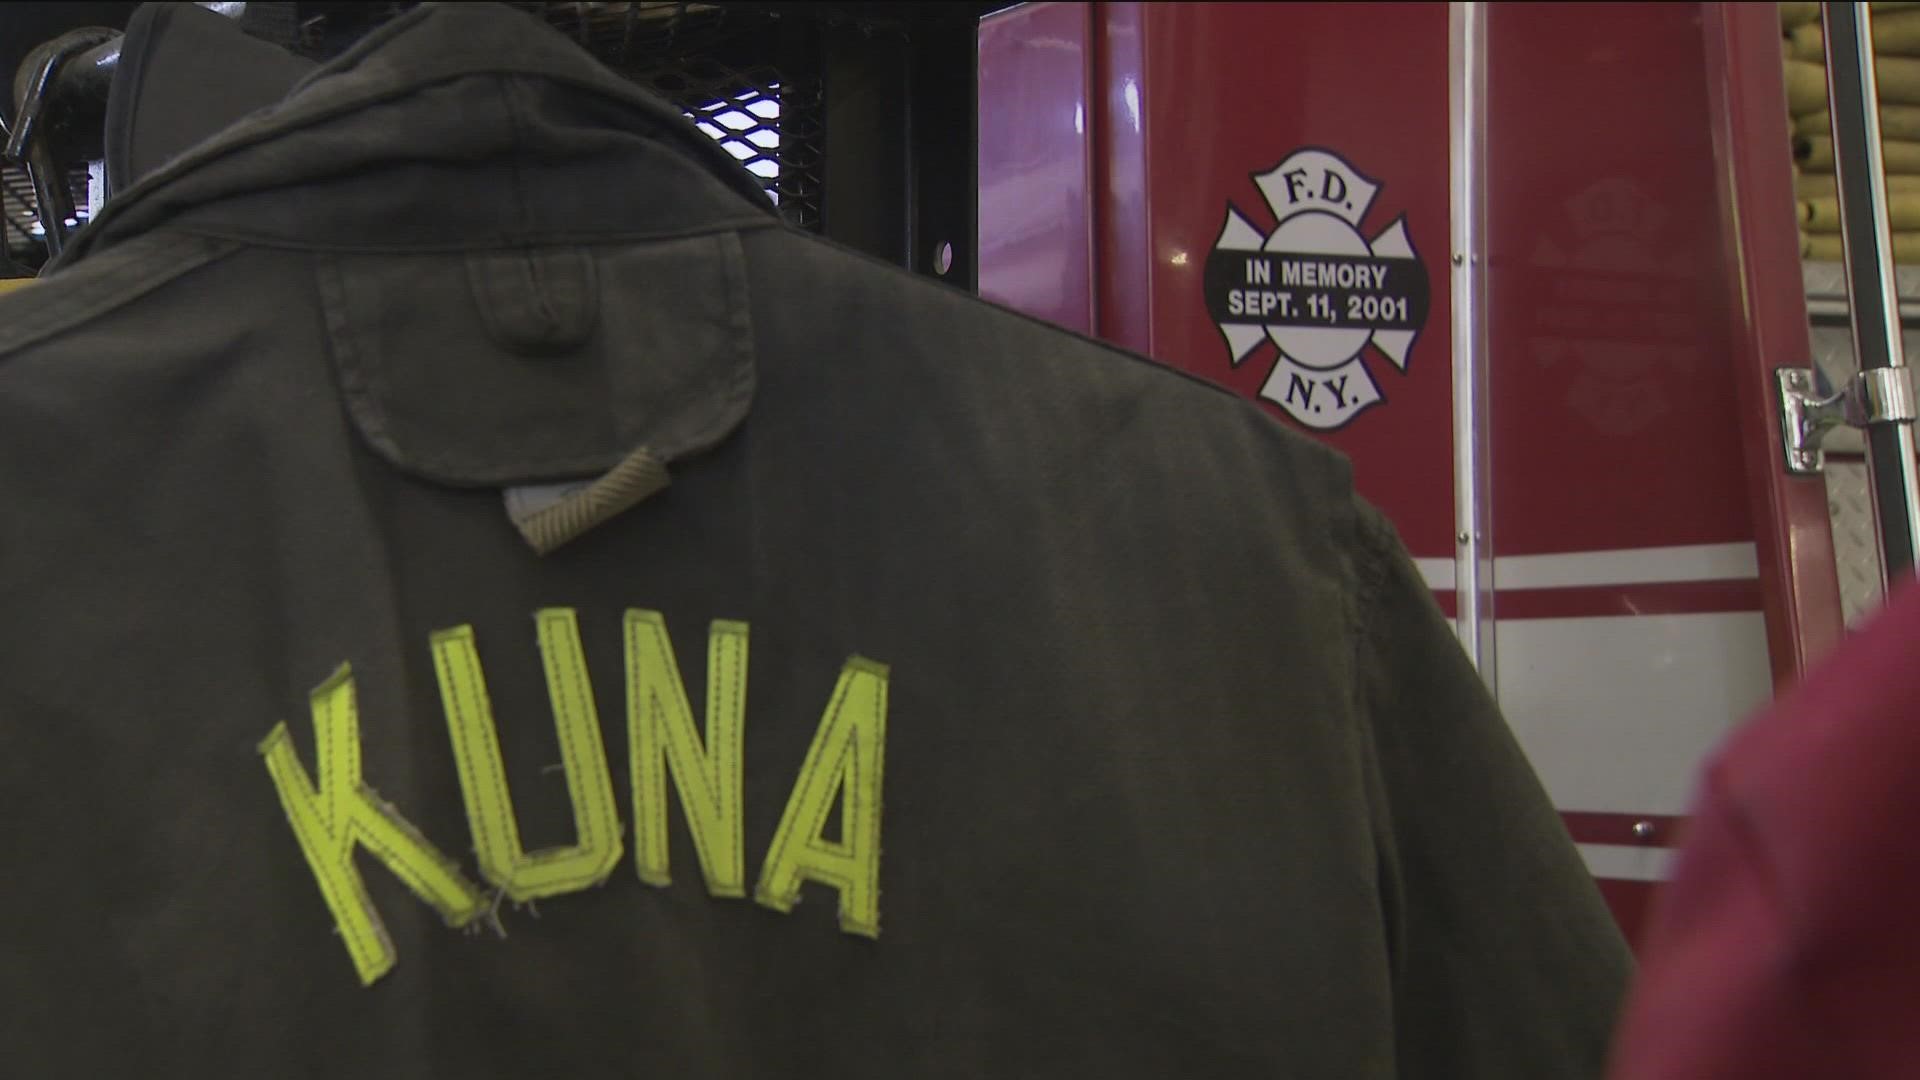 Emergency calls volumes have increased 72% for Kuna Fire in the past 10 years.